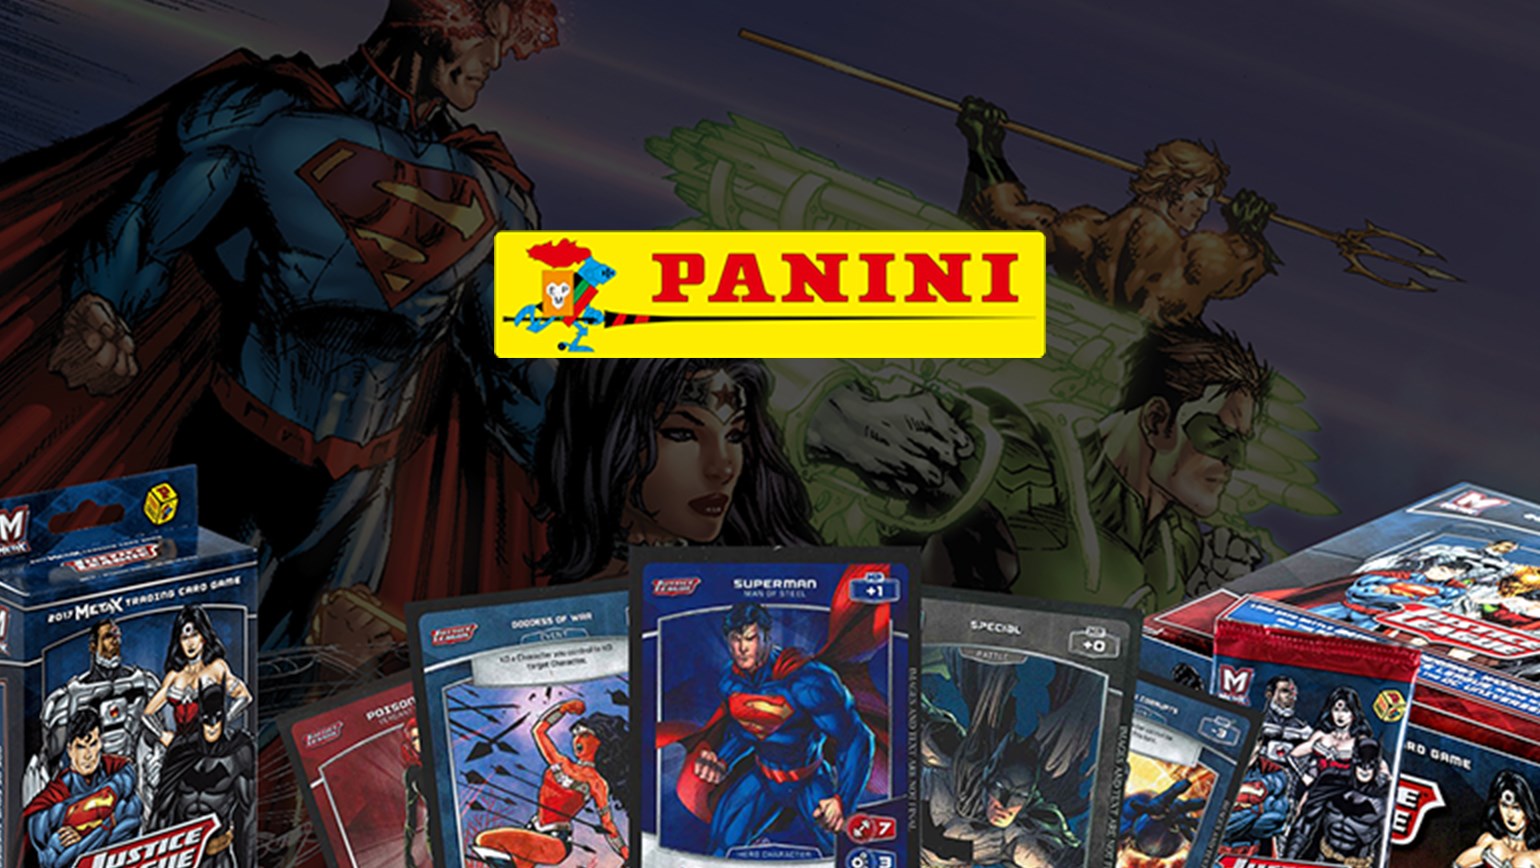 Panini Games’ MetaX Available to List